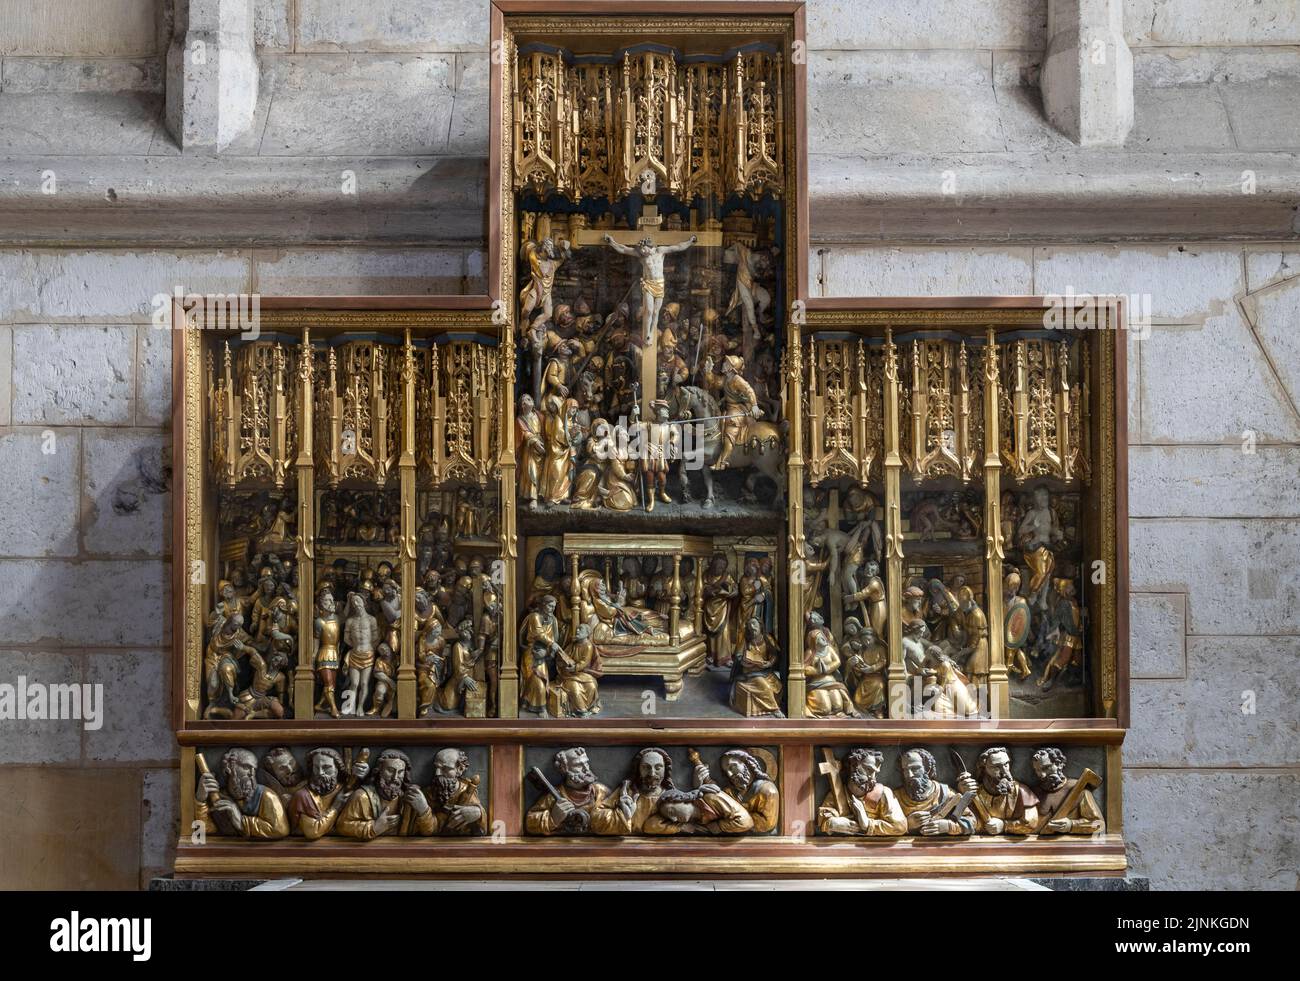 France, Oise, Picardie, Beauvais, Saint Pierre de Beauvais Gothic cathedral, the altarpiece of the Passion, known as the Marissel altarpiece dated 16t Stock Photo